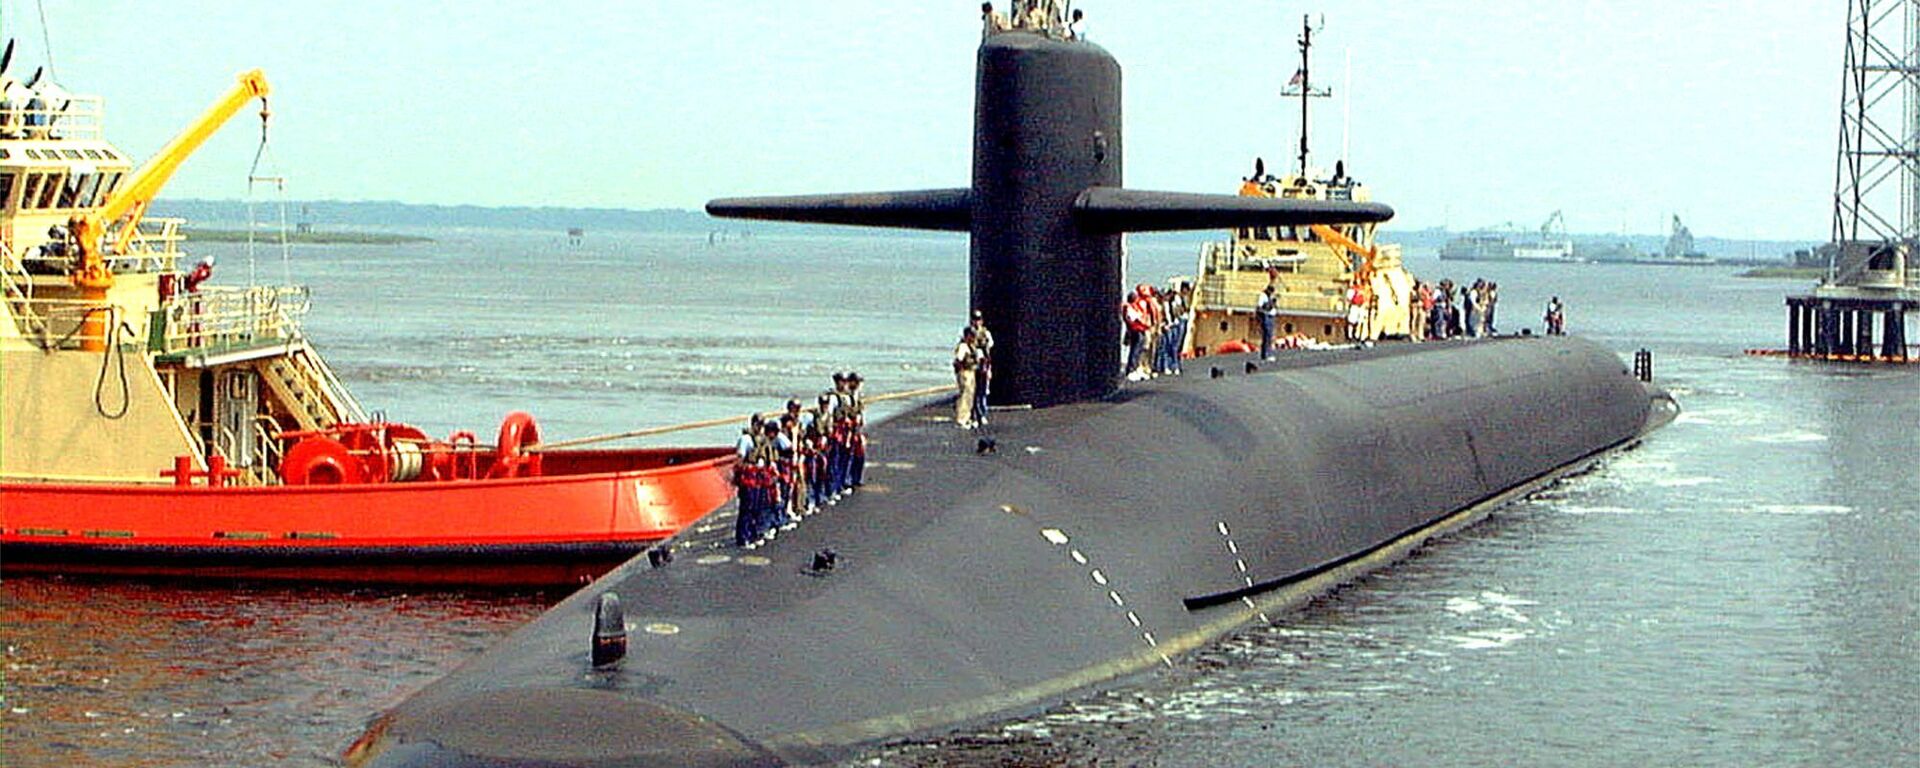 The USS Louisiana, the last of the 18 Trident submarines, arrives at its homeport, the Naval Submarine Base in Kings Bay. (File) - Sputnik International, 1920, 26.03.2024